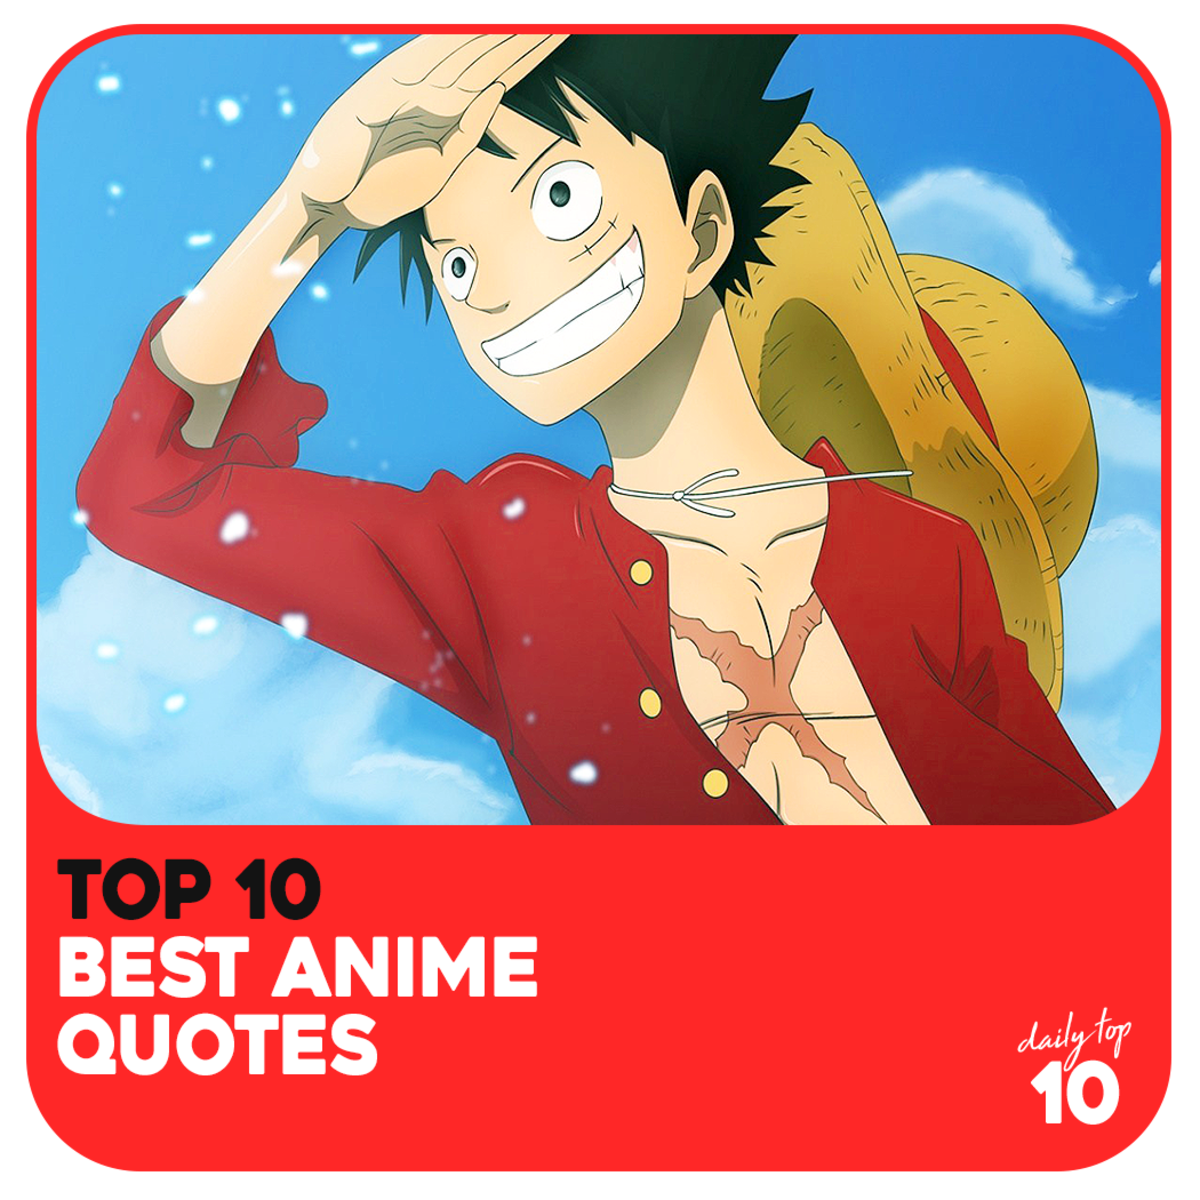 Top 10 Best Anime Quotes